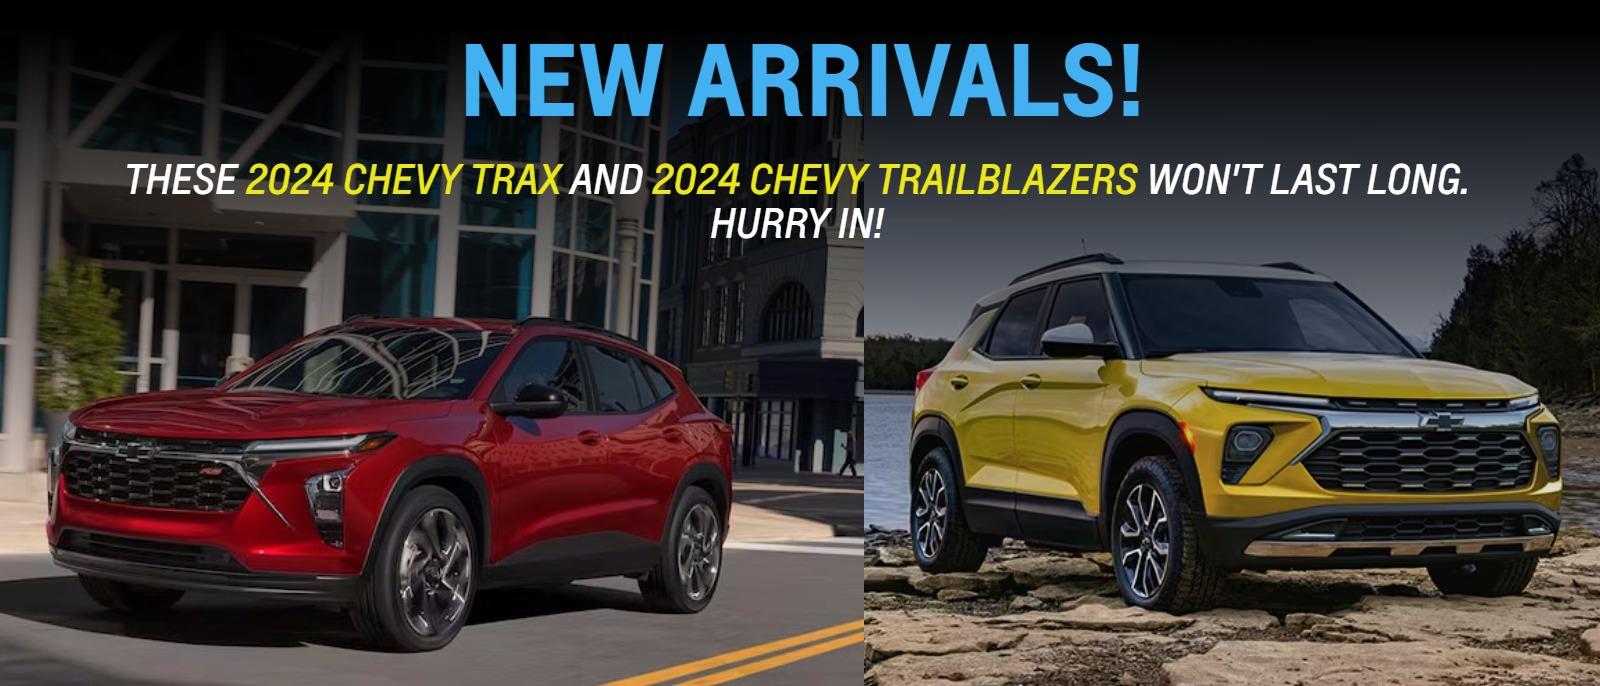 New Arrivals!

These 2024 Chevy Trax and 2024 Chevy Trailblazers won't last long. Hurry In!